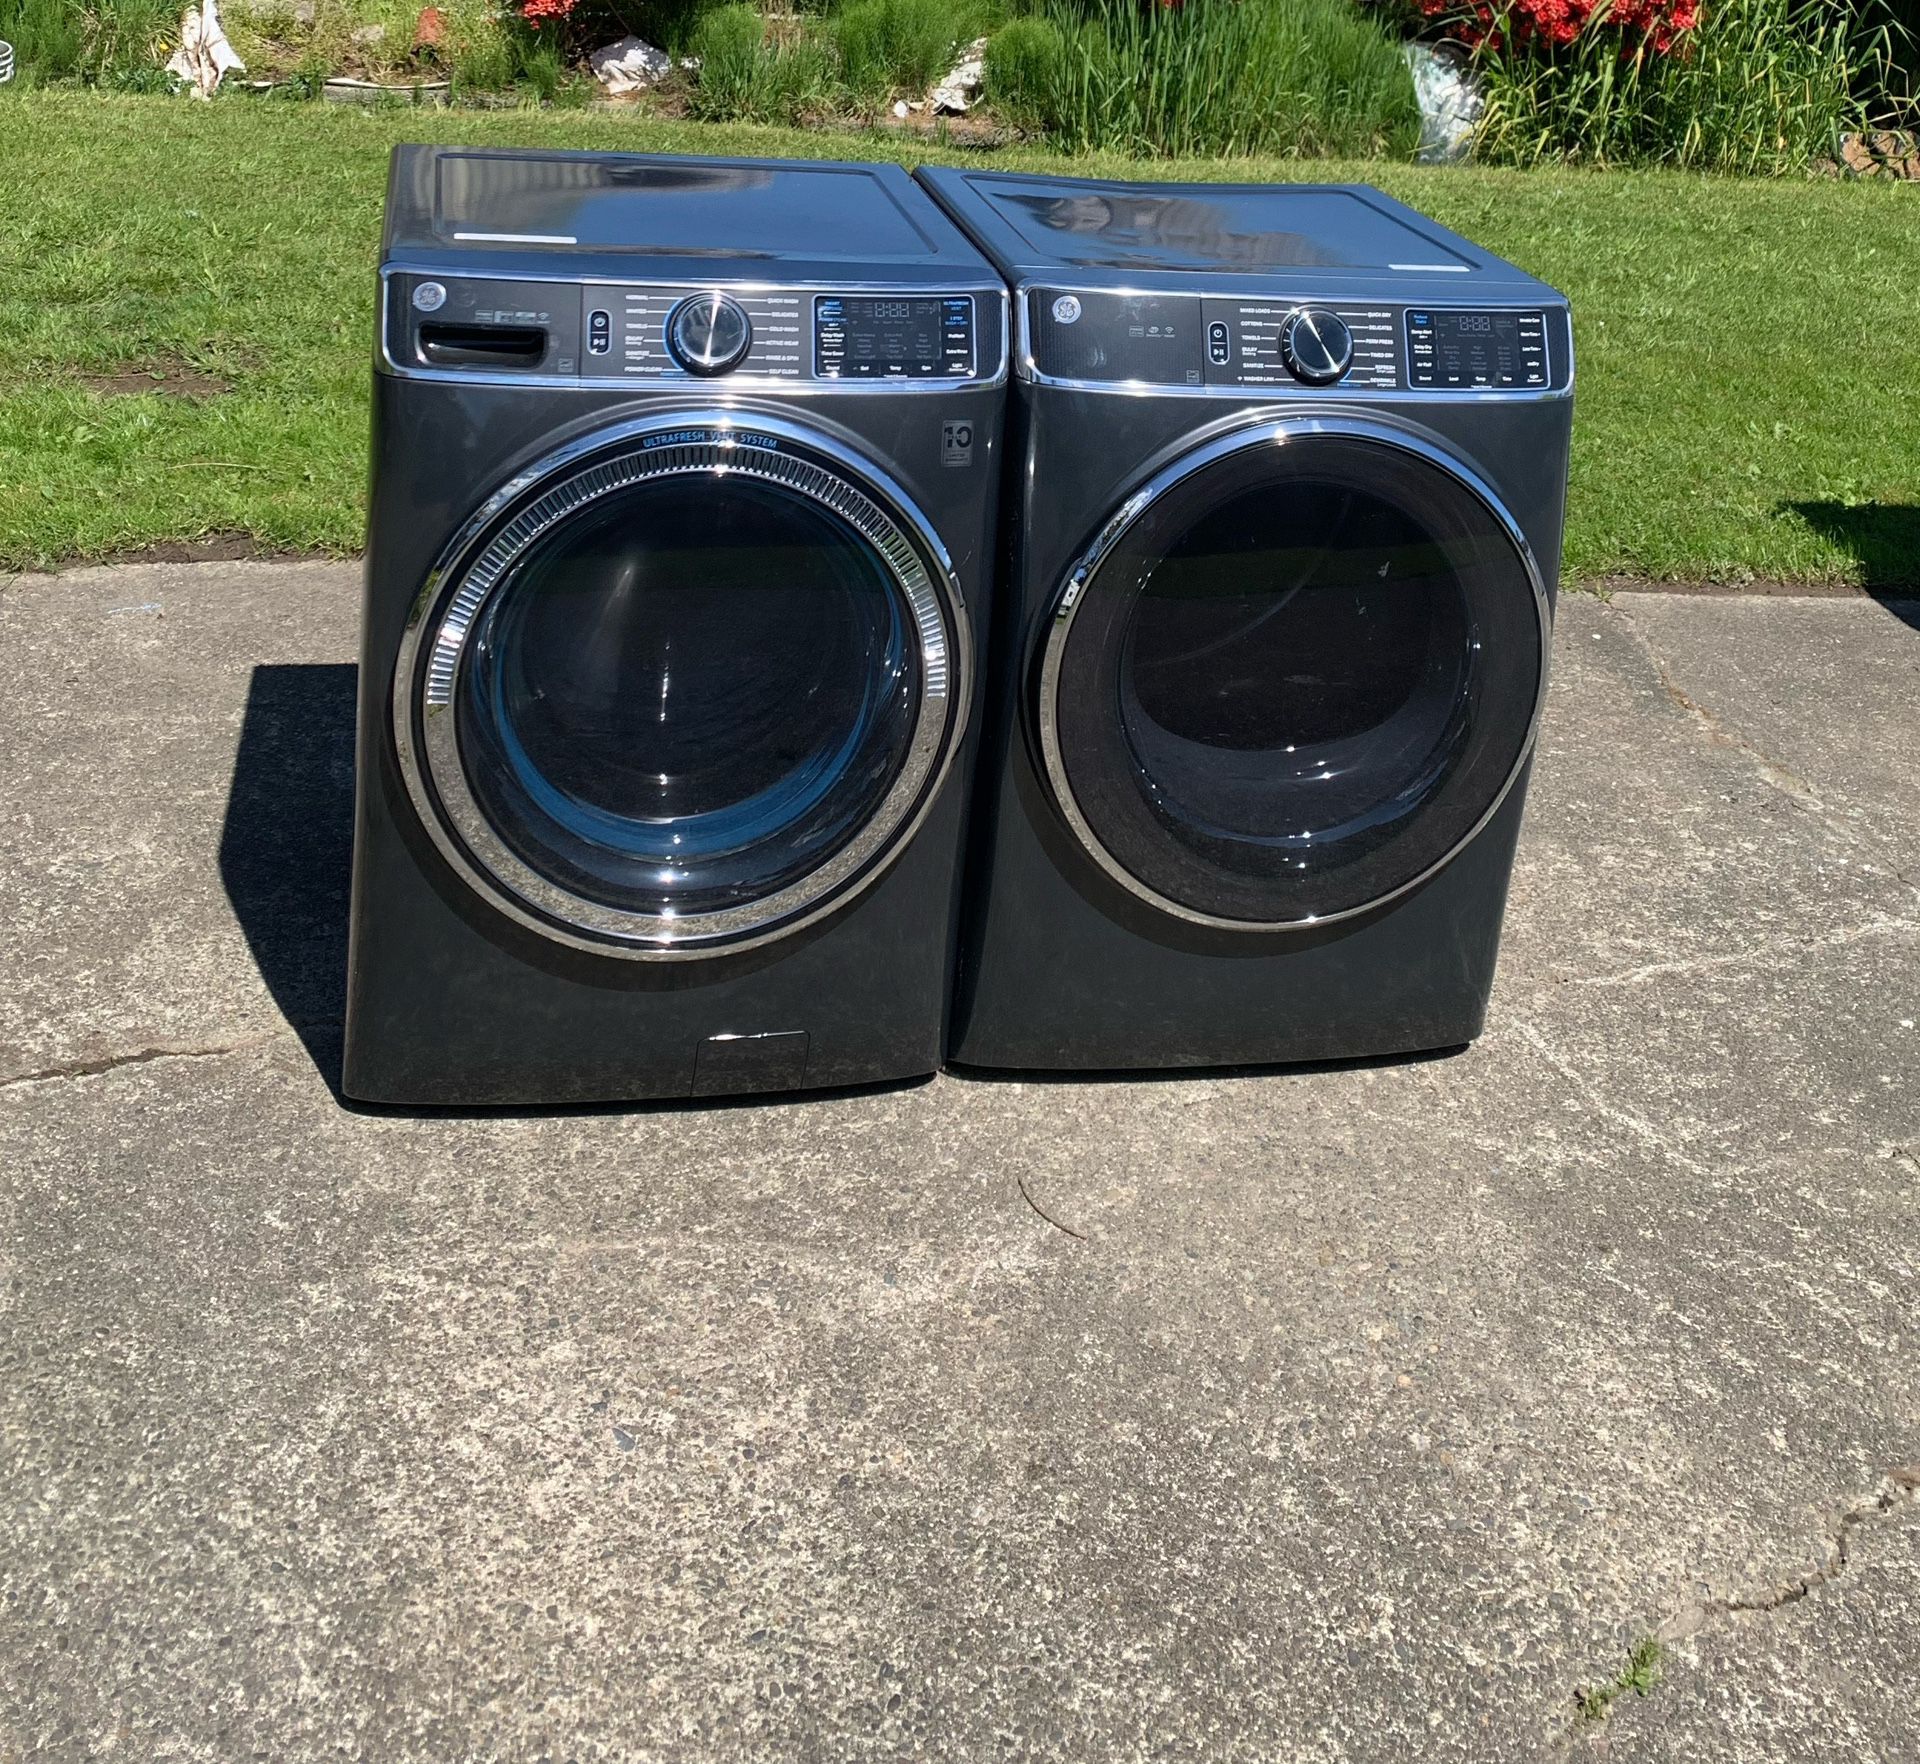 GE WASHER AND DRYER SET.